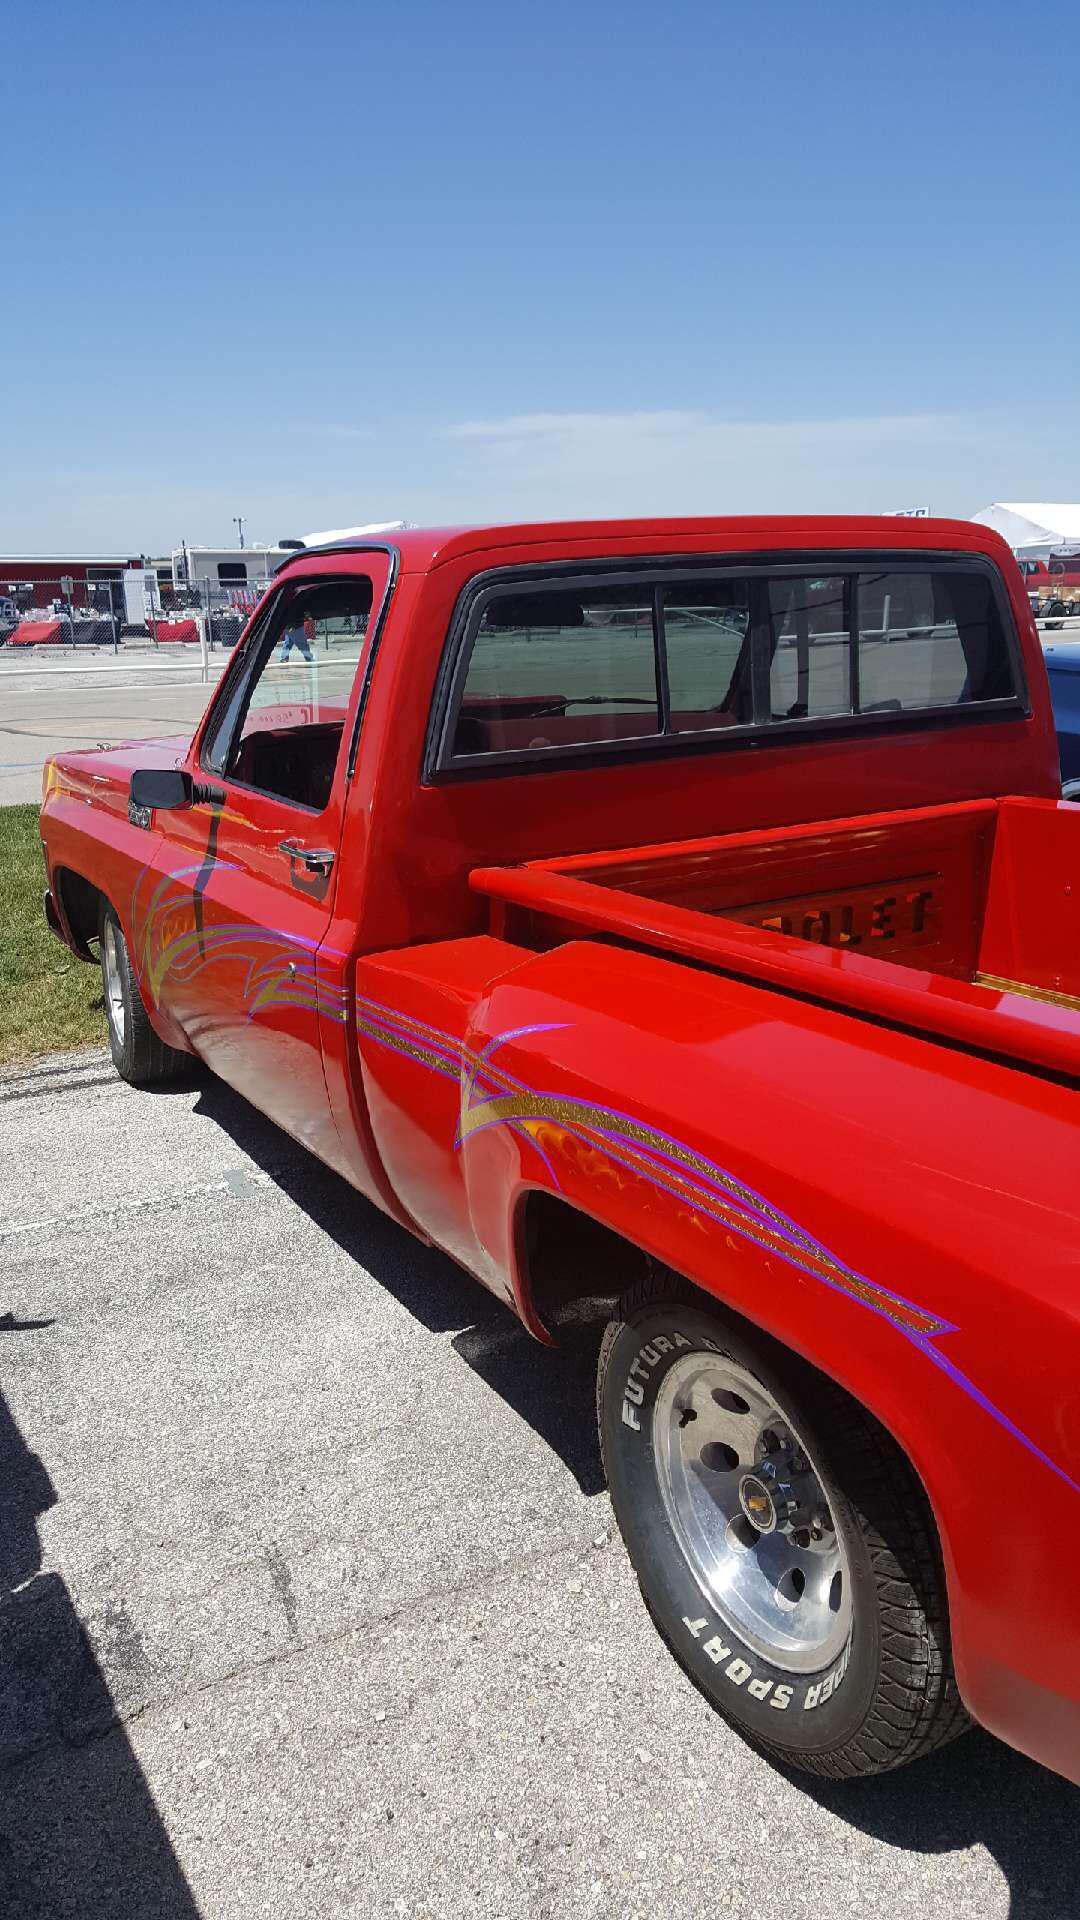 1979 Chevrolet C-10 Pickup Lowed to $19,000 from $36k